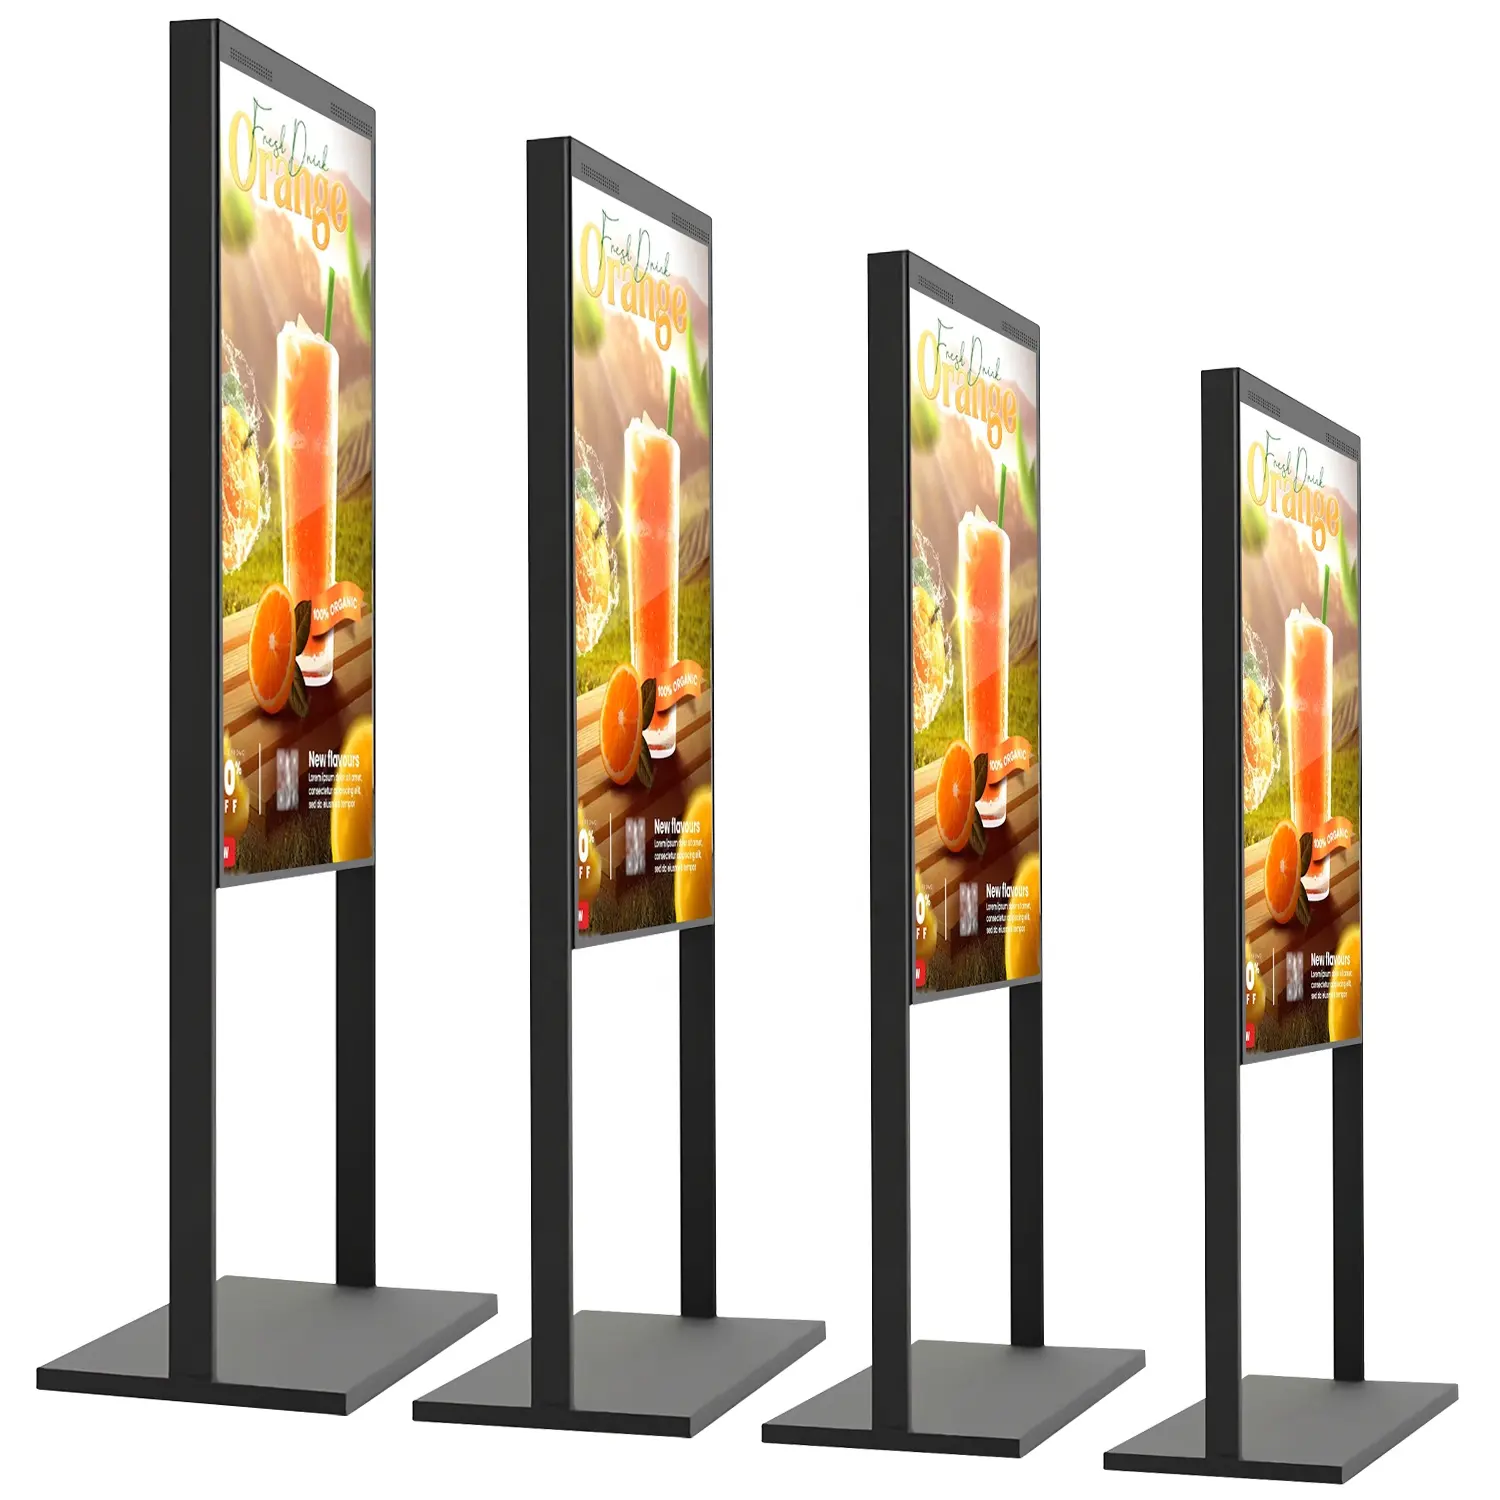 55 inch Outdoor LCD Commercial kiosk digital siginage and display high brightness window display 2500nits media player